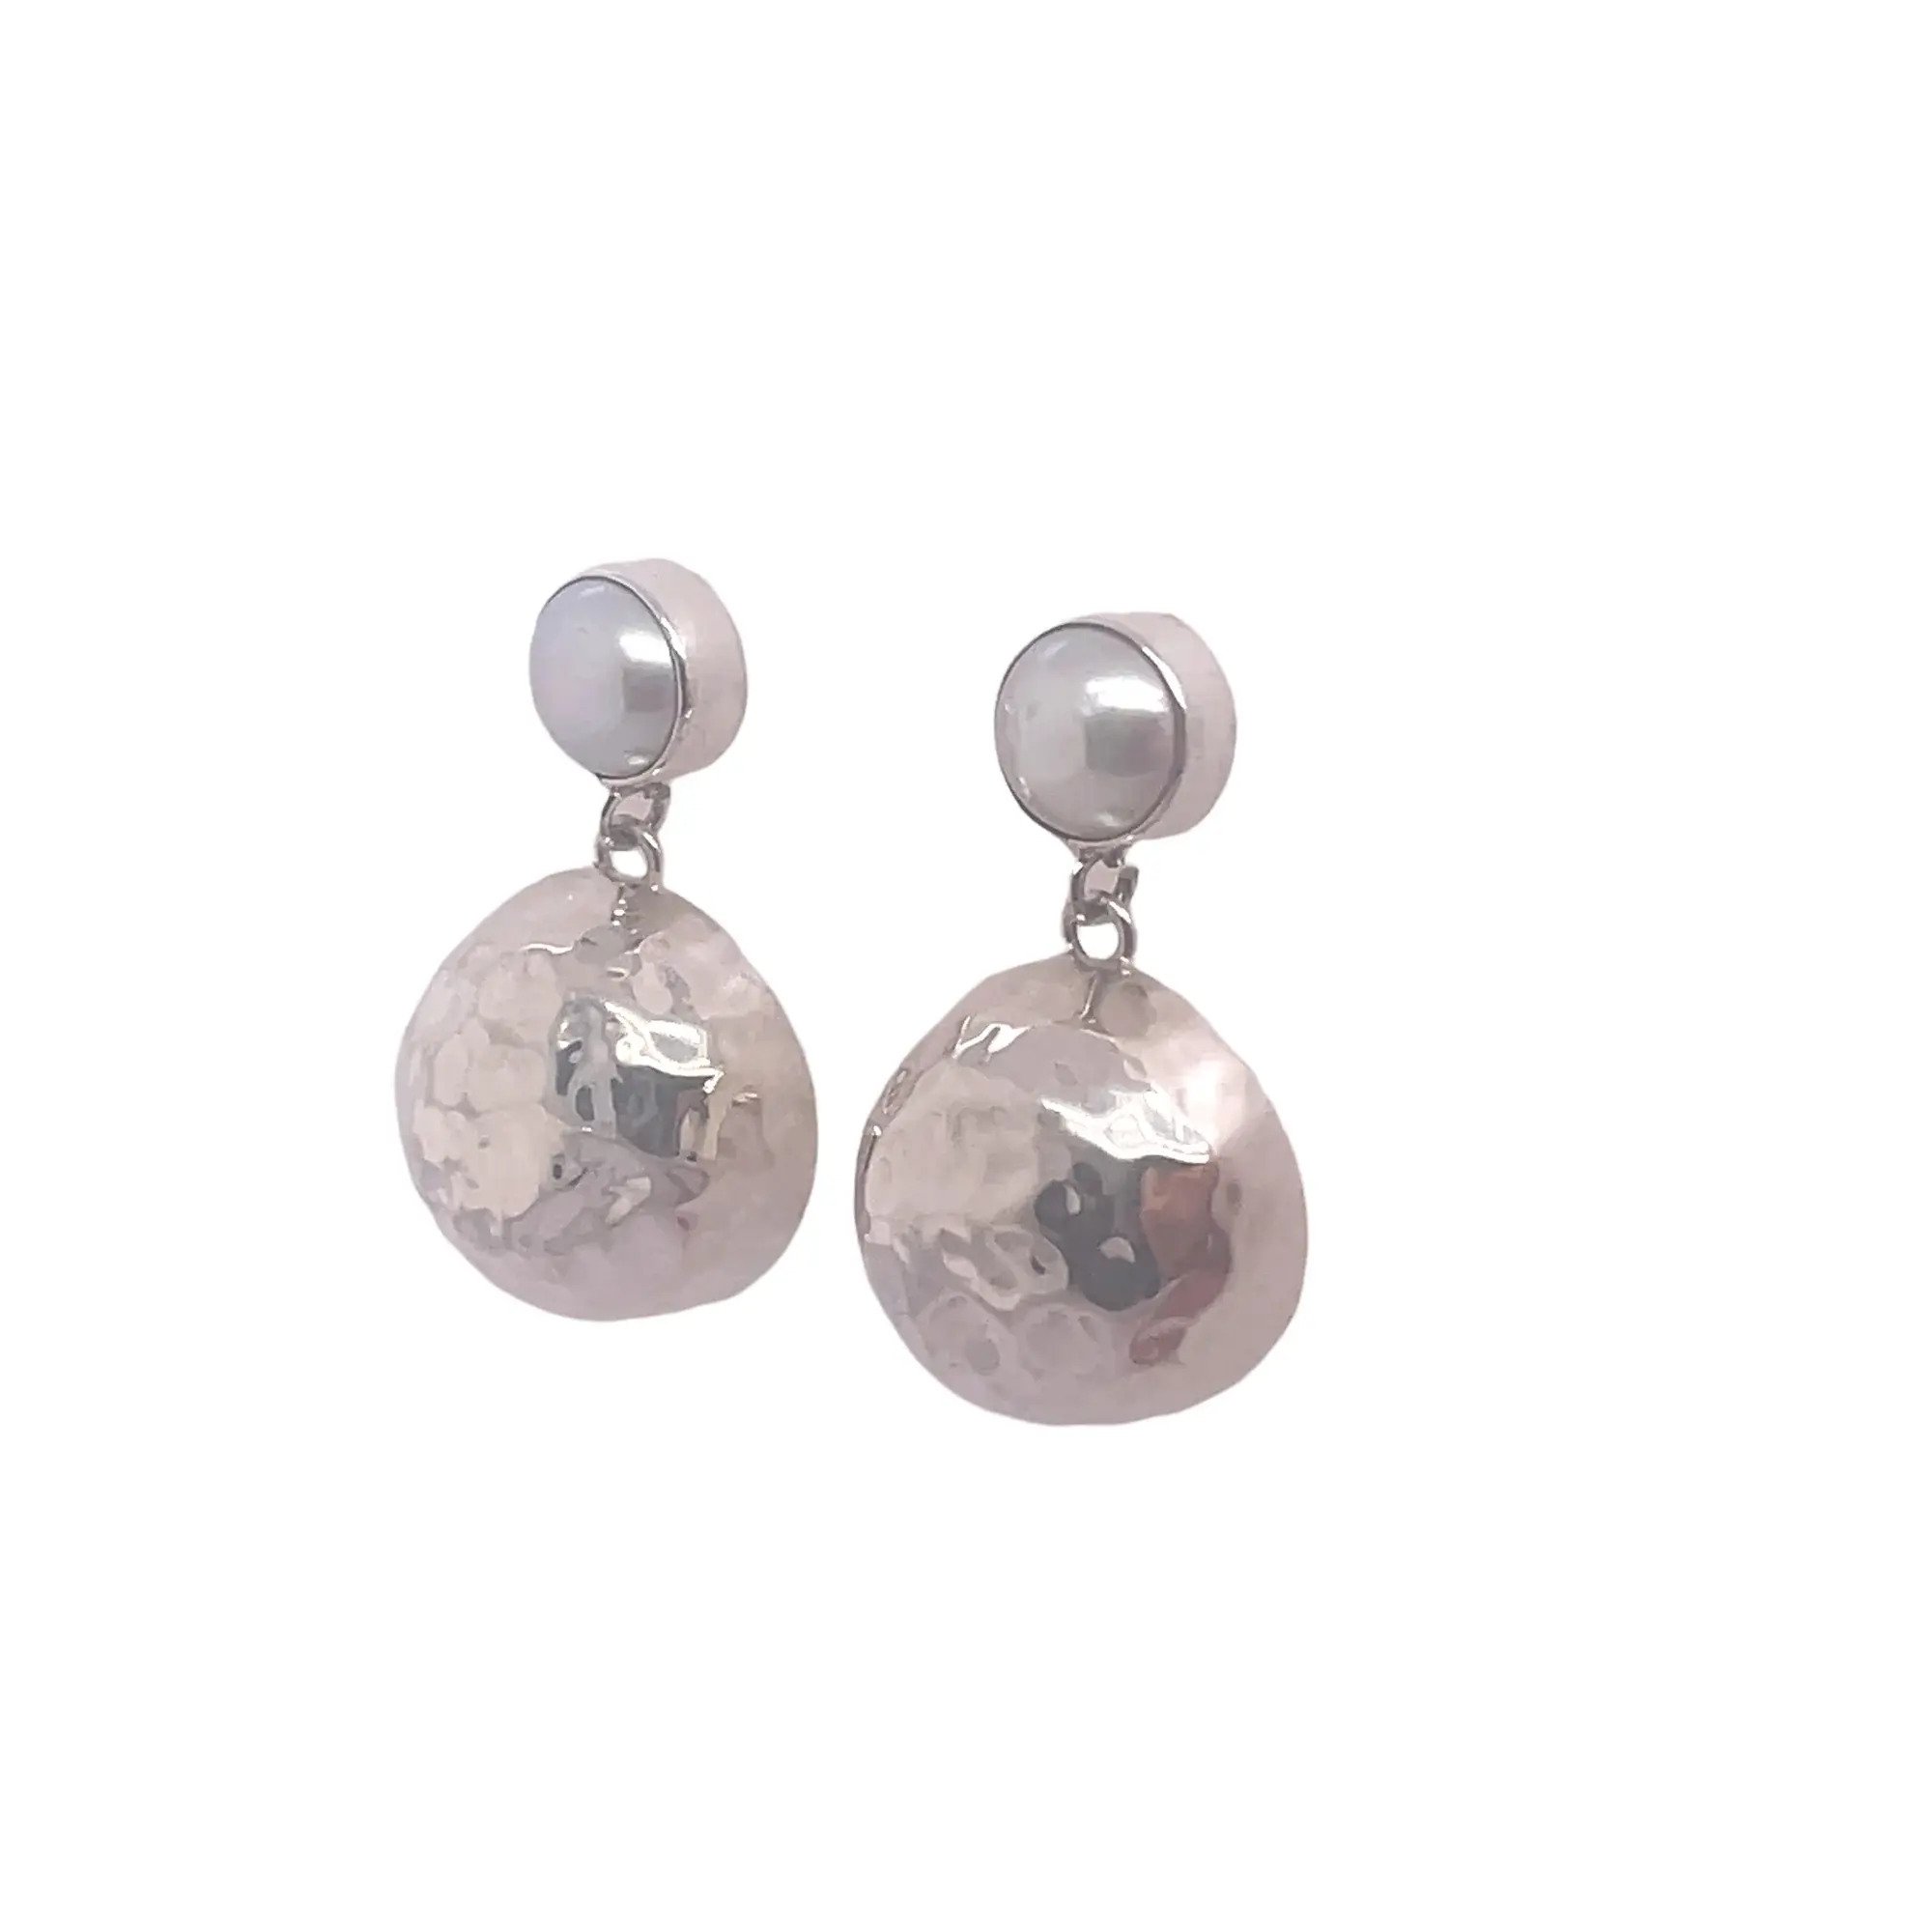 Silver Circular Dangles with Pearl Small Brushed Finish